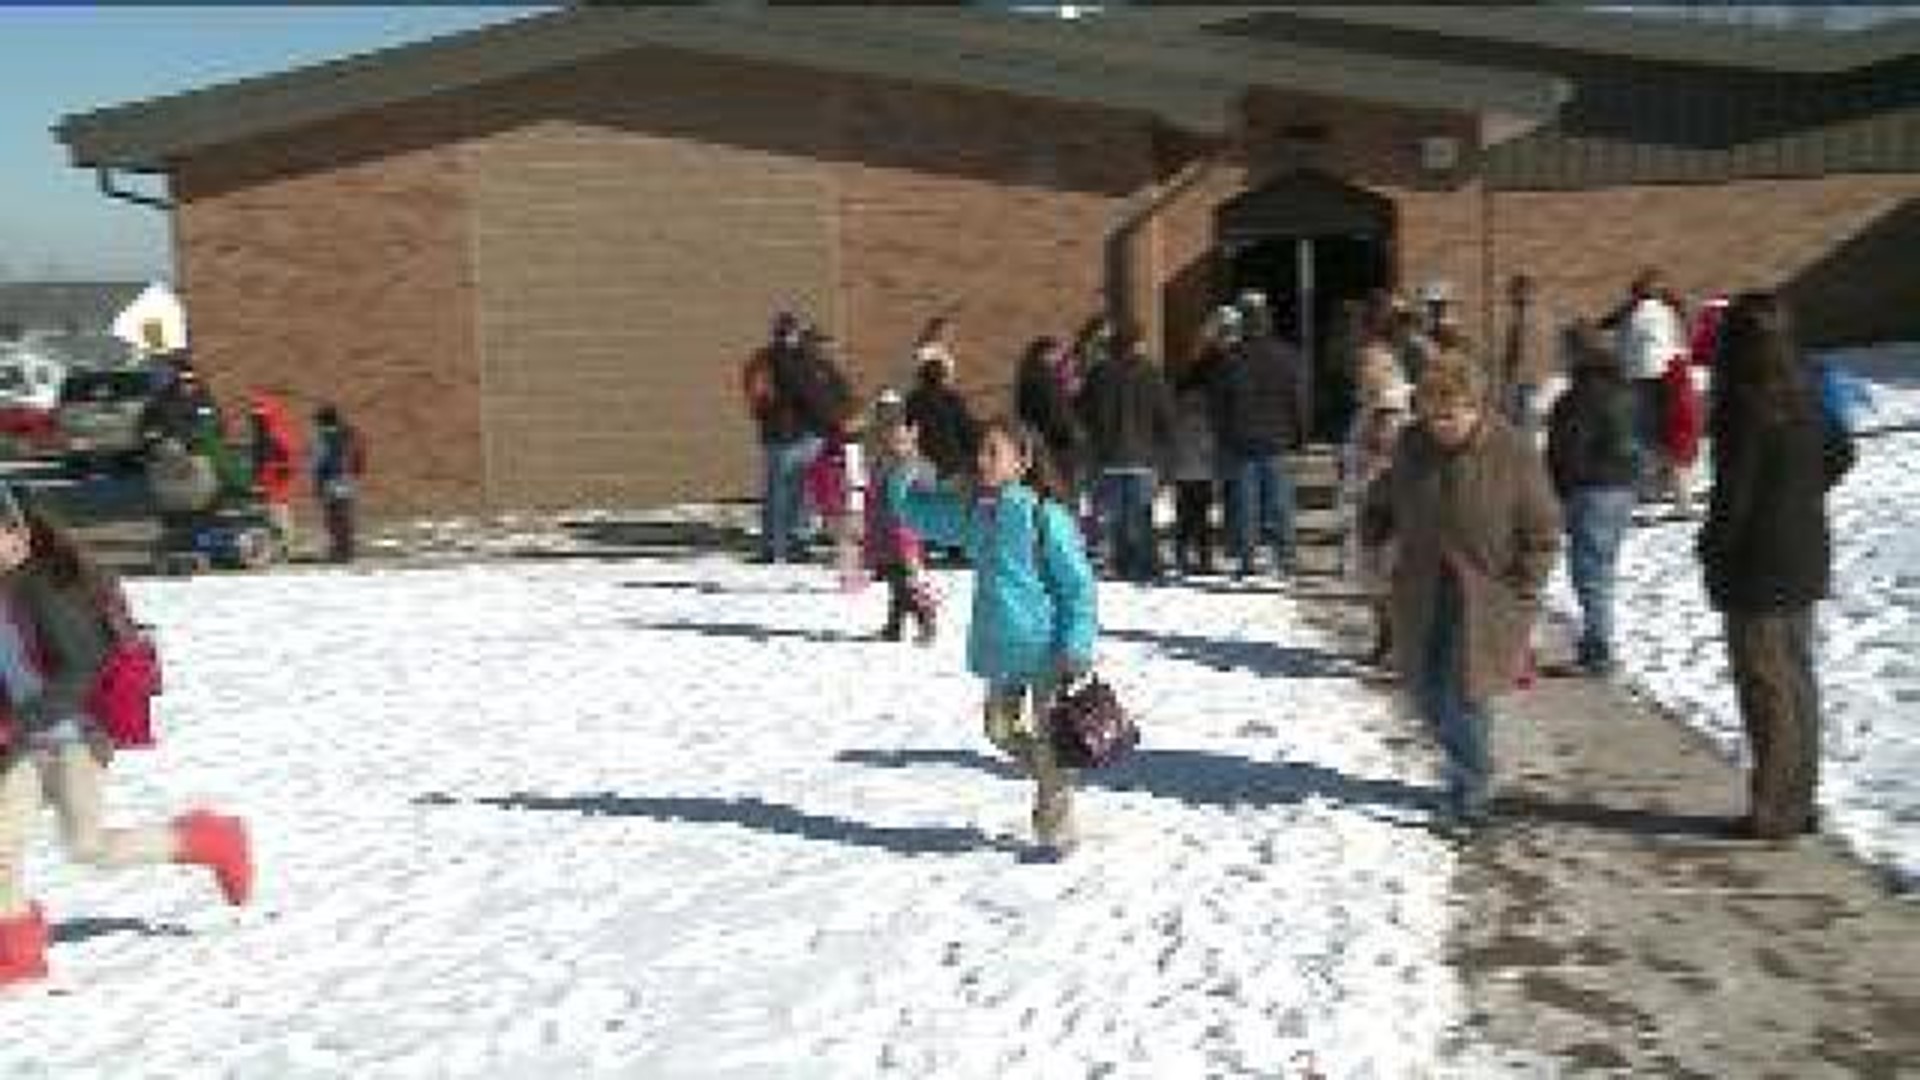 Schools Dismiss Early Before Water Shut Off